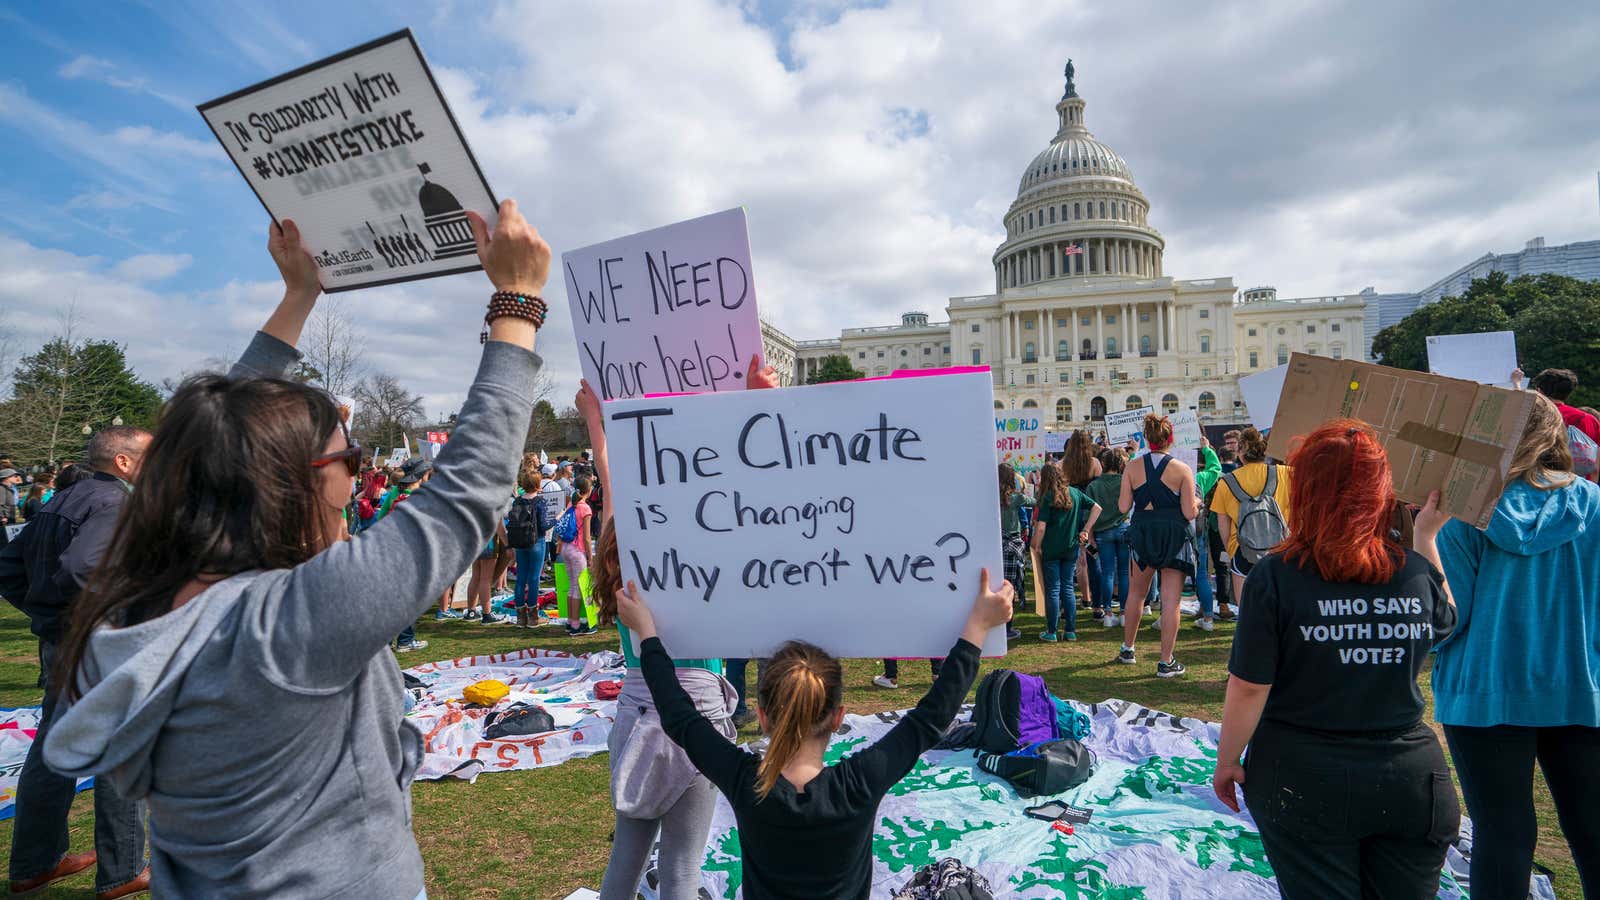 Young demonstrators join the 2019 International Youth Climate Strike event at the Capitol in Washington